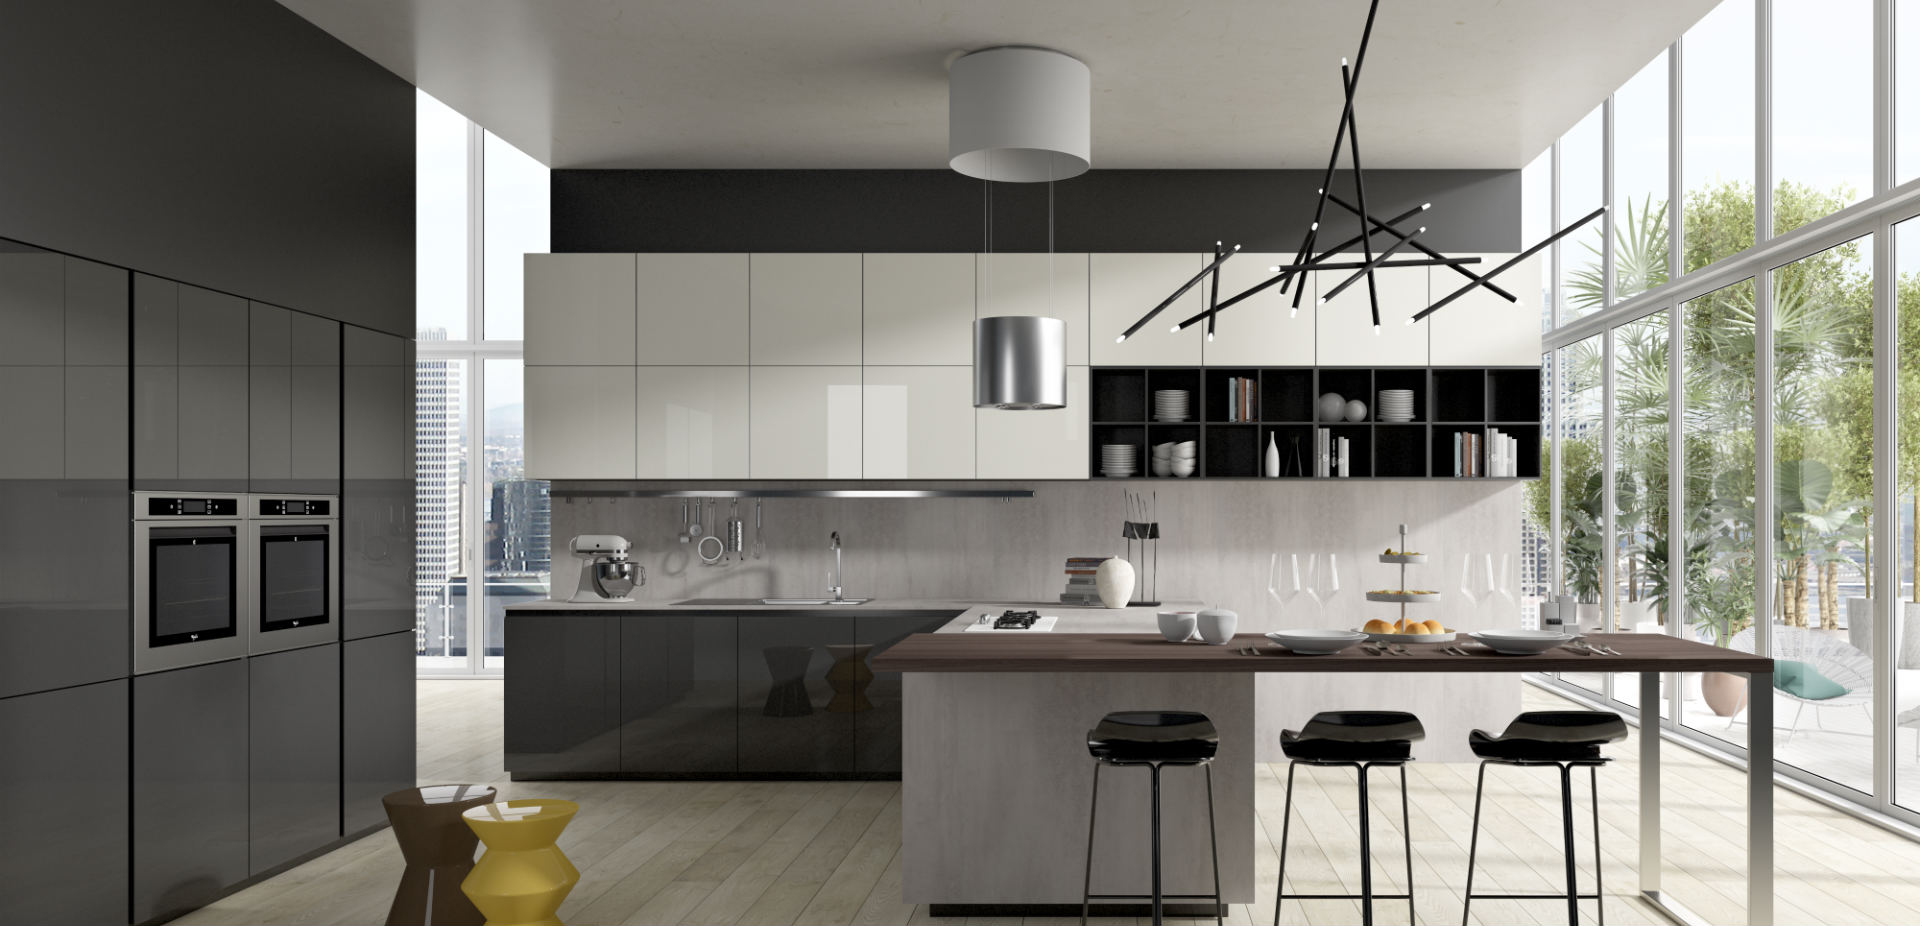 The most innovative materials for your kitchen worktop